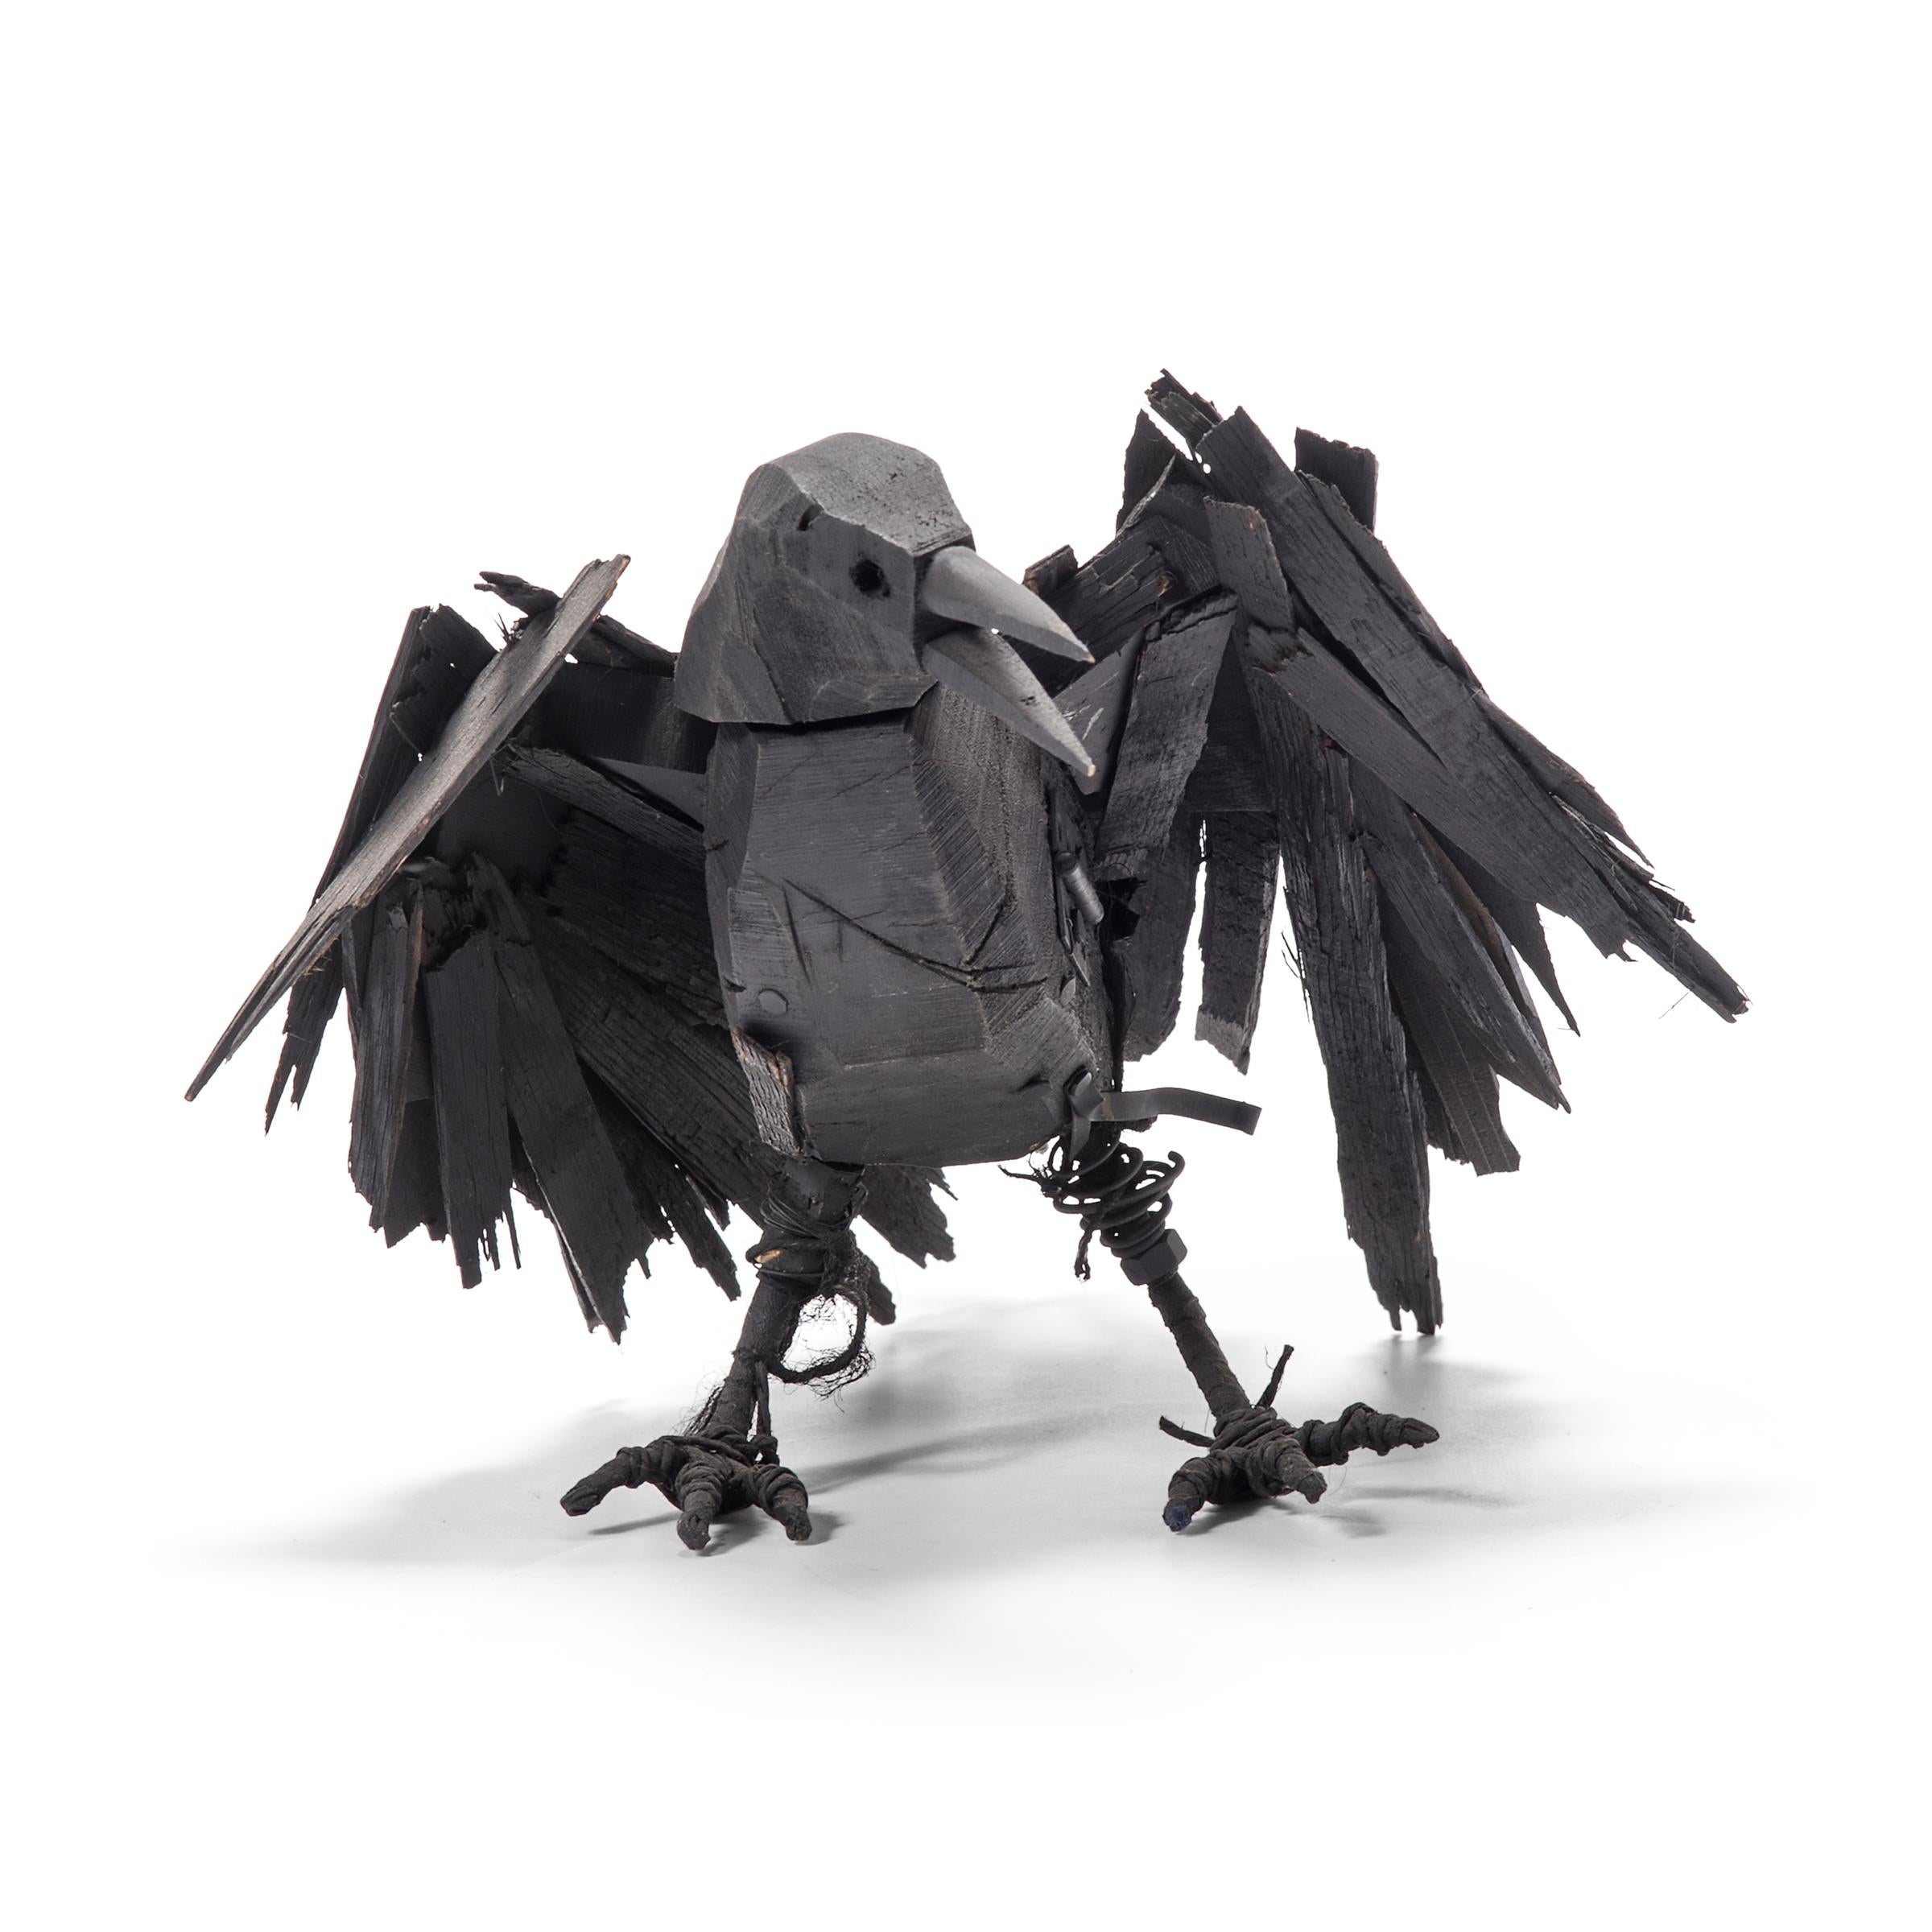 Richly textured with a haphazard appeal, these wooden crow sculptures are a delightful example of American folk art. Poised mid-caw, the crow's wings are outstretched, ready to burst into flight. As though life materialized from a pile of scrap wood